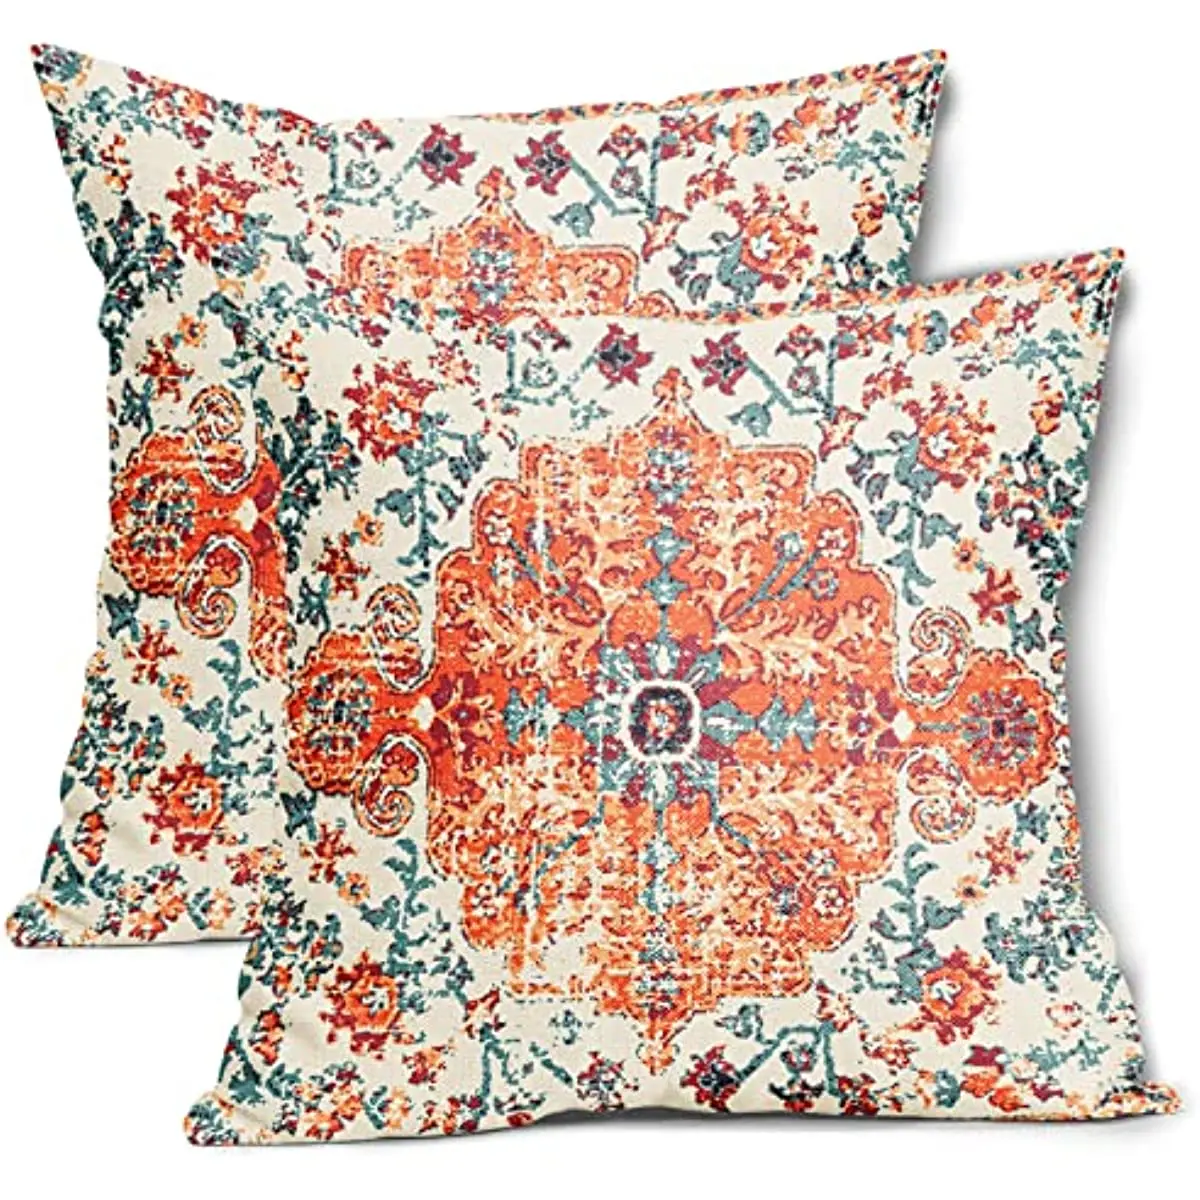 https://ae01.alicdn.com/kf/S0a8712d34b864b679b4bd906d4190285d/Orange-Blue-Ethnic-Pillow-Cases-Bohemian-Boho-Floral-Pillow-Case-20x20-Inch-Throw-Pillow-Cover-Home.jpg